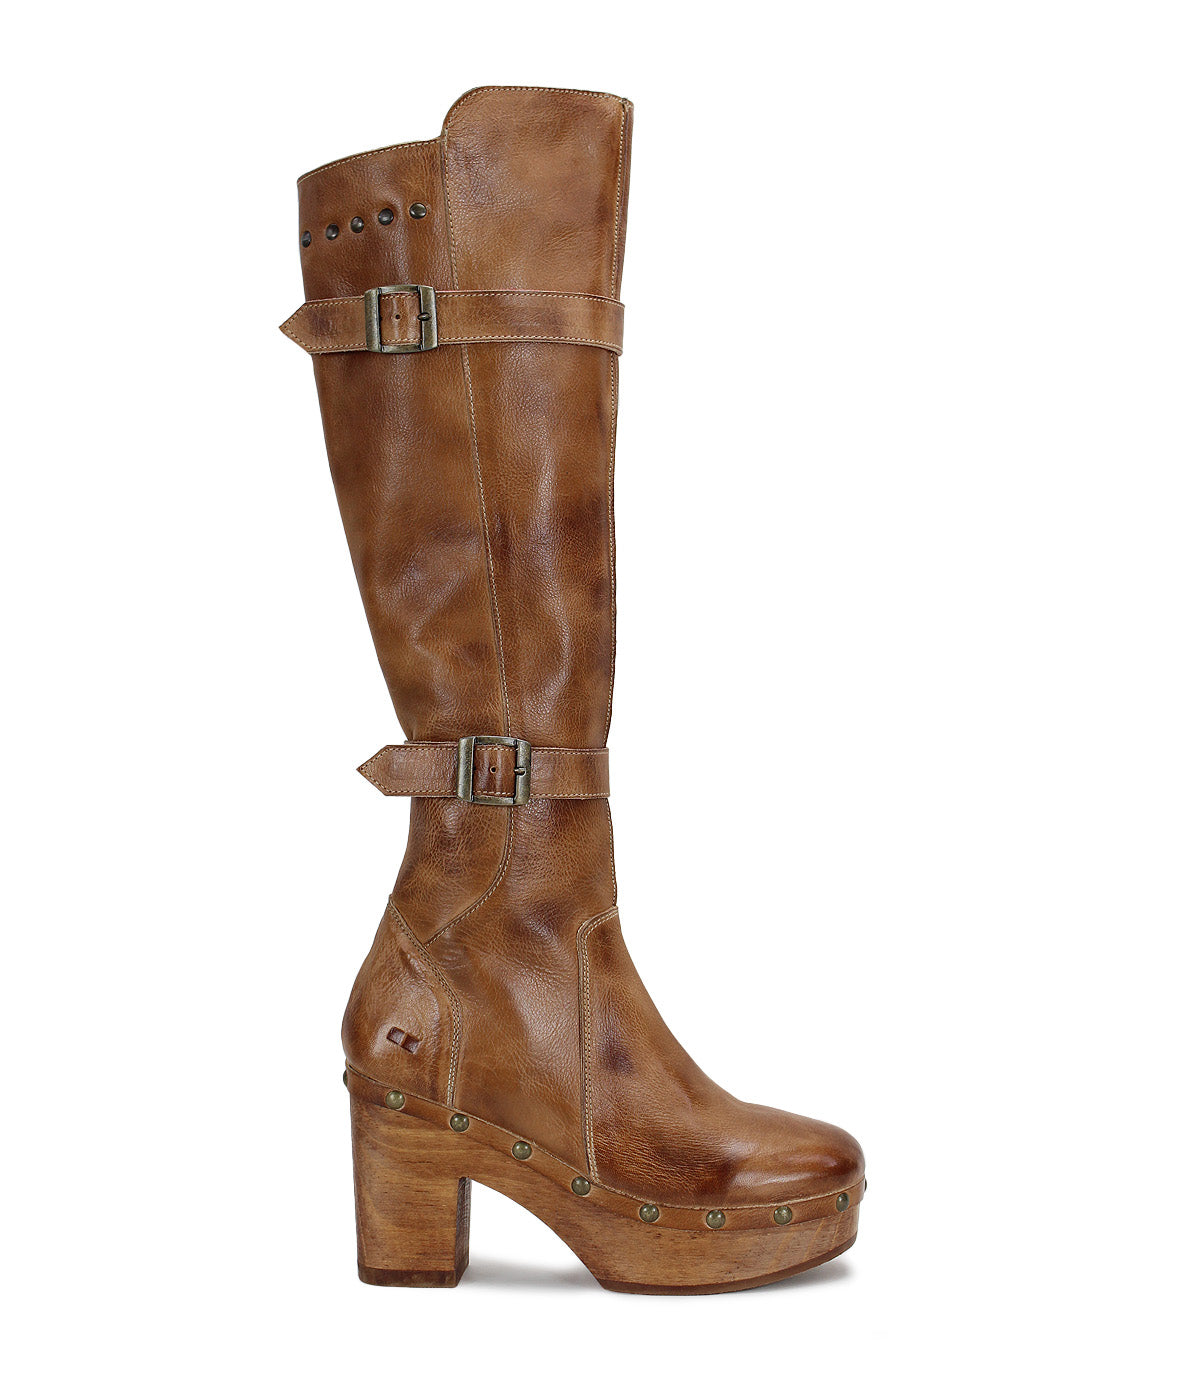 A women's Ceretti boot with a wooden heel, brand Bed Stu.